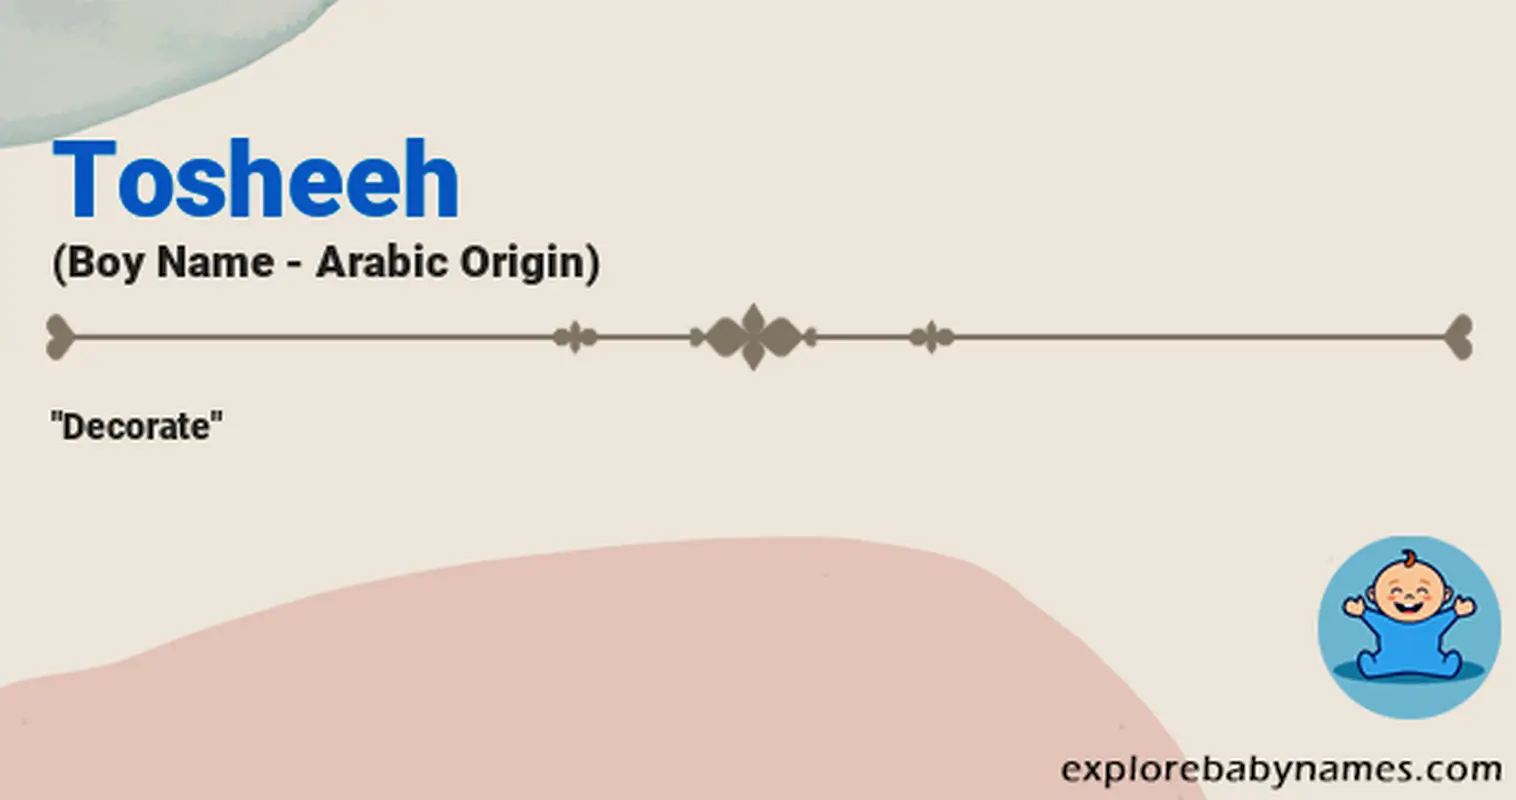 Meaning of Tosheeh